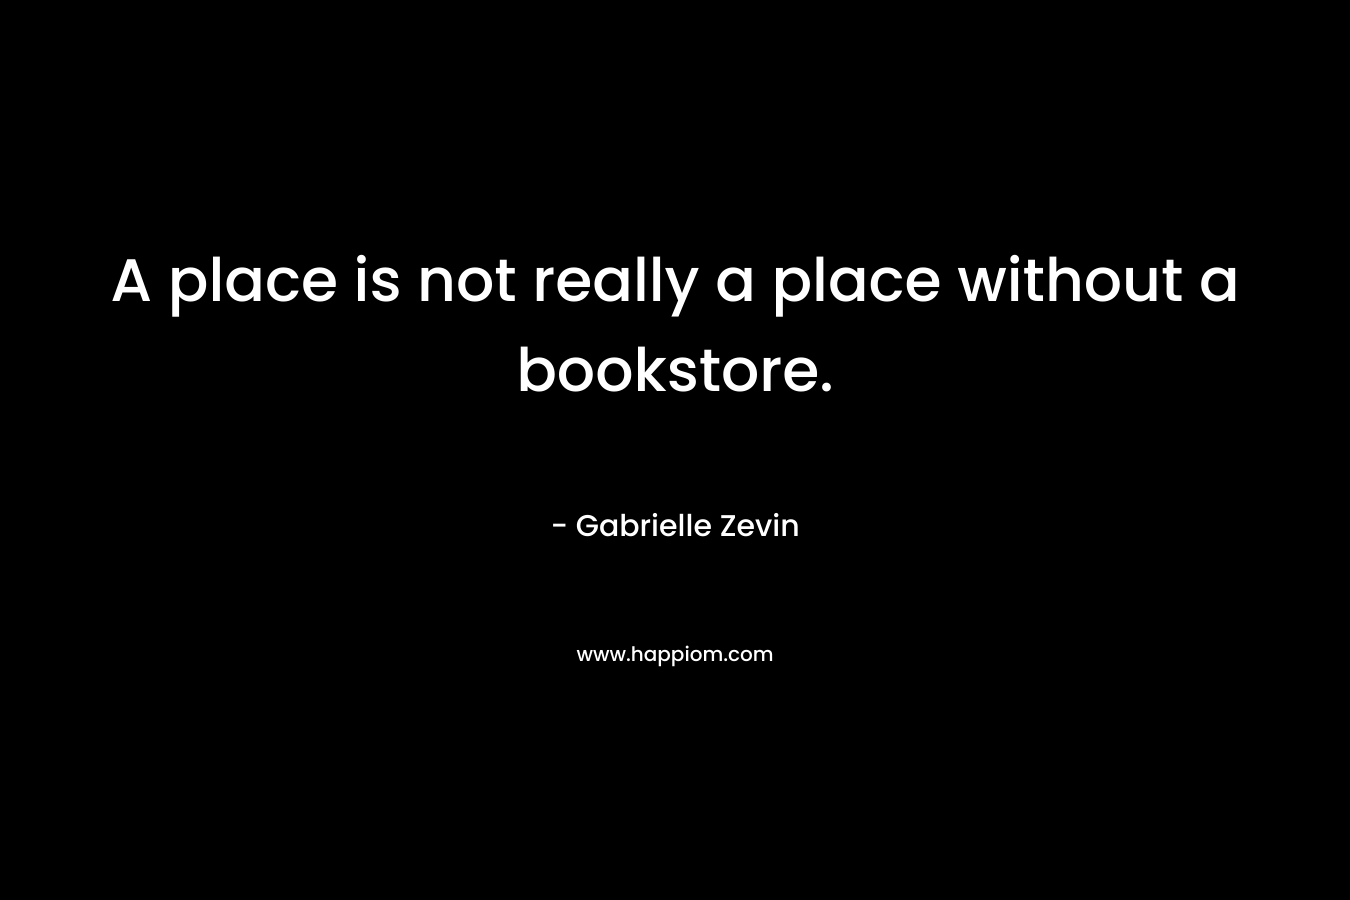 A place is not really a place without a bookstore.